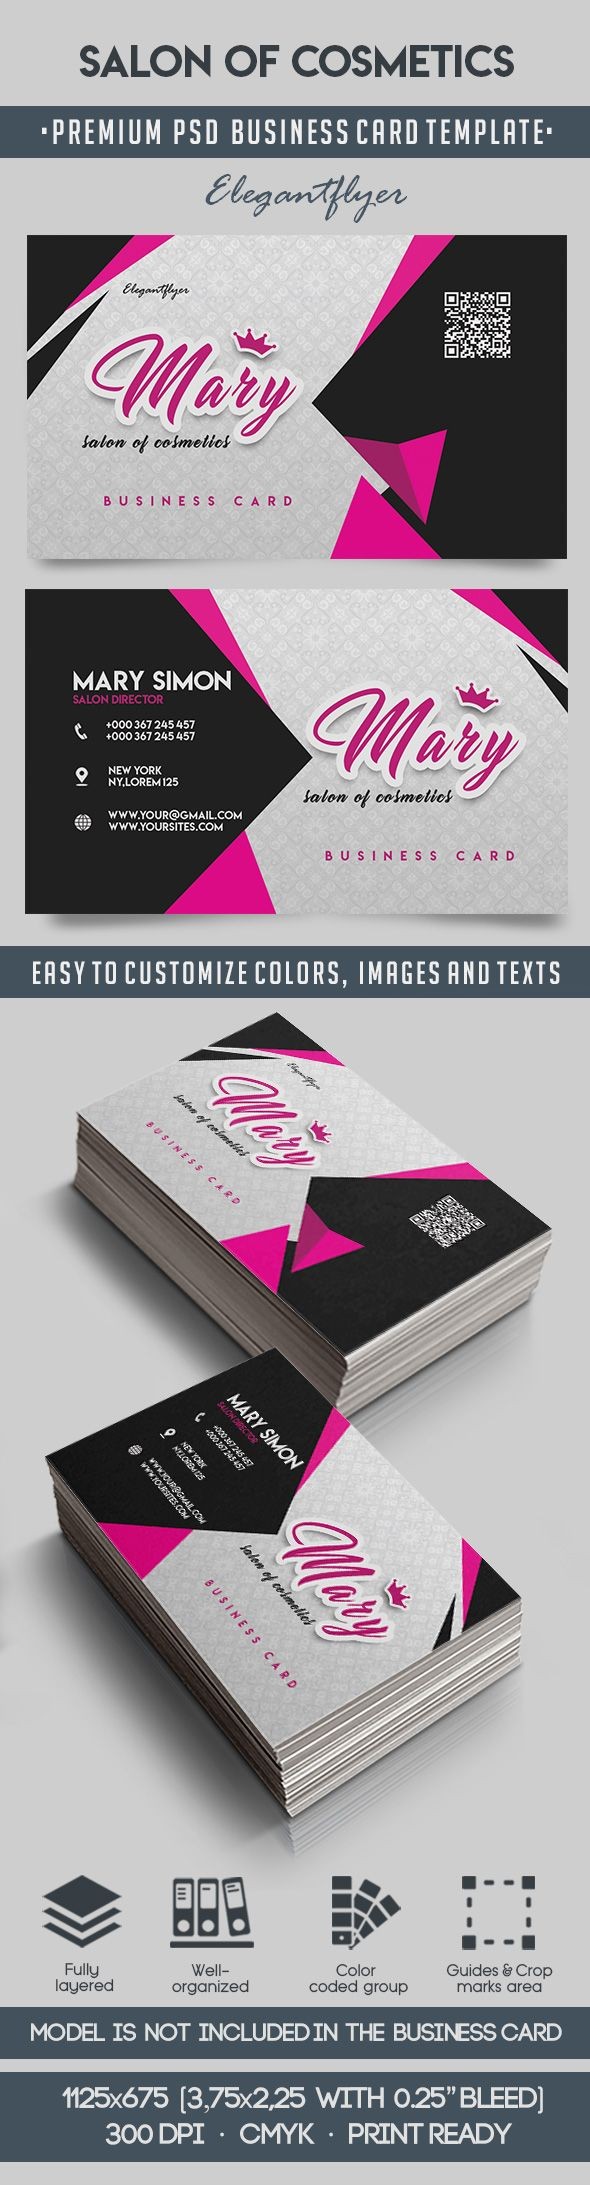 cosmetics business cards 1